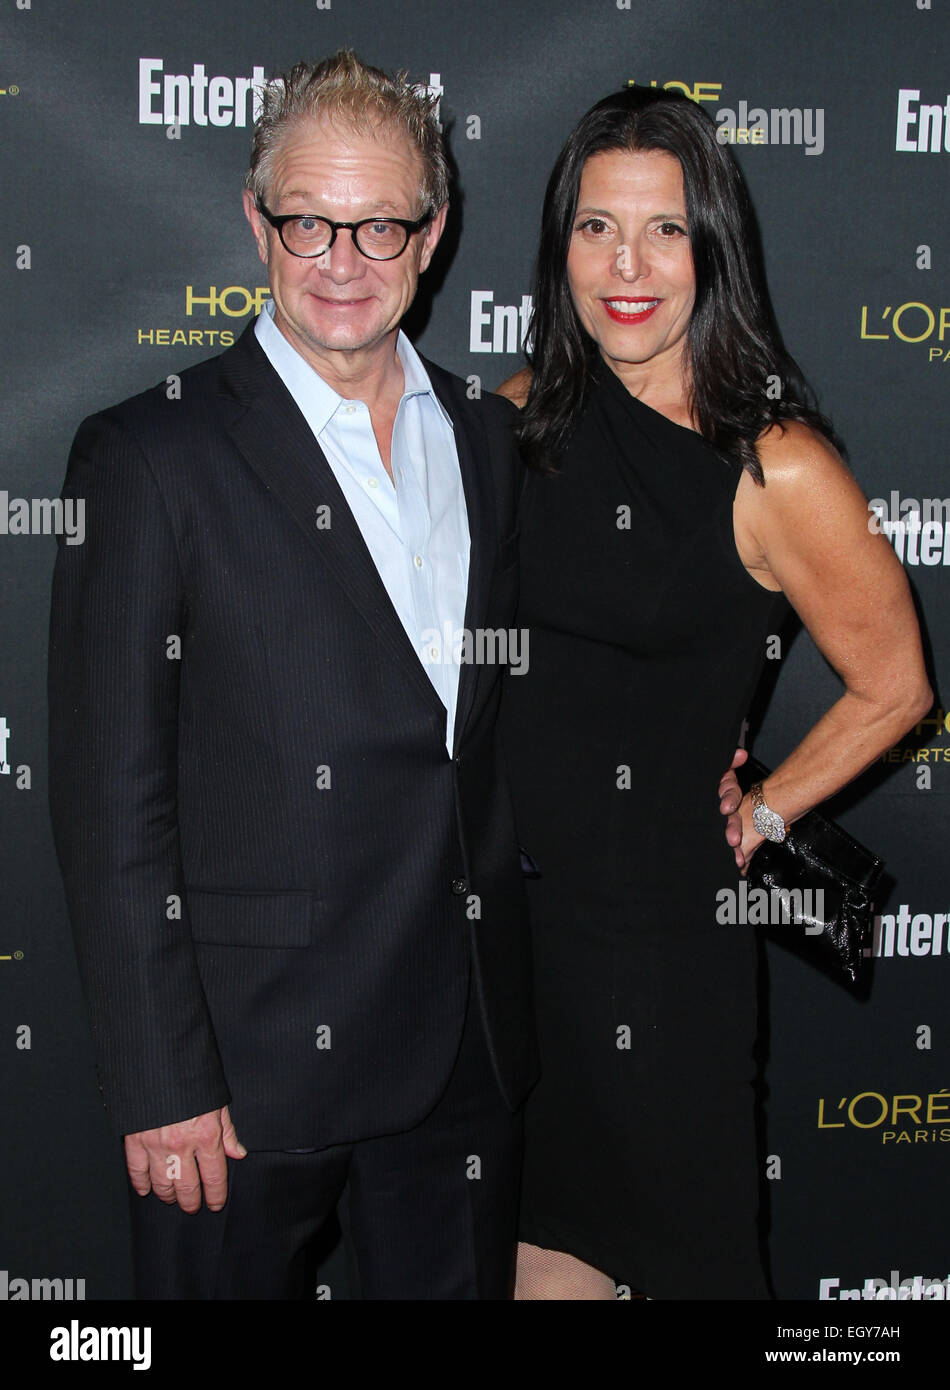 2014 Entertainment Weekly pre-Emmy party - Arrivals Featuring: Jeff ...